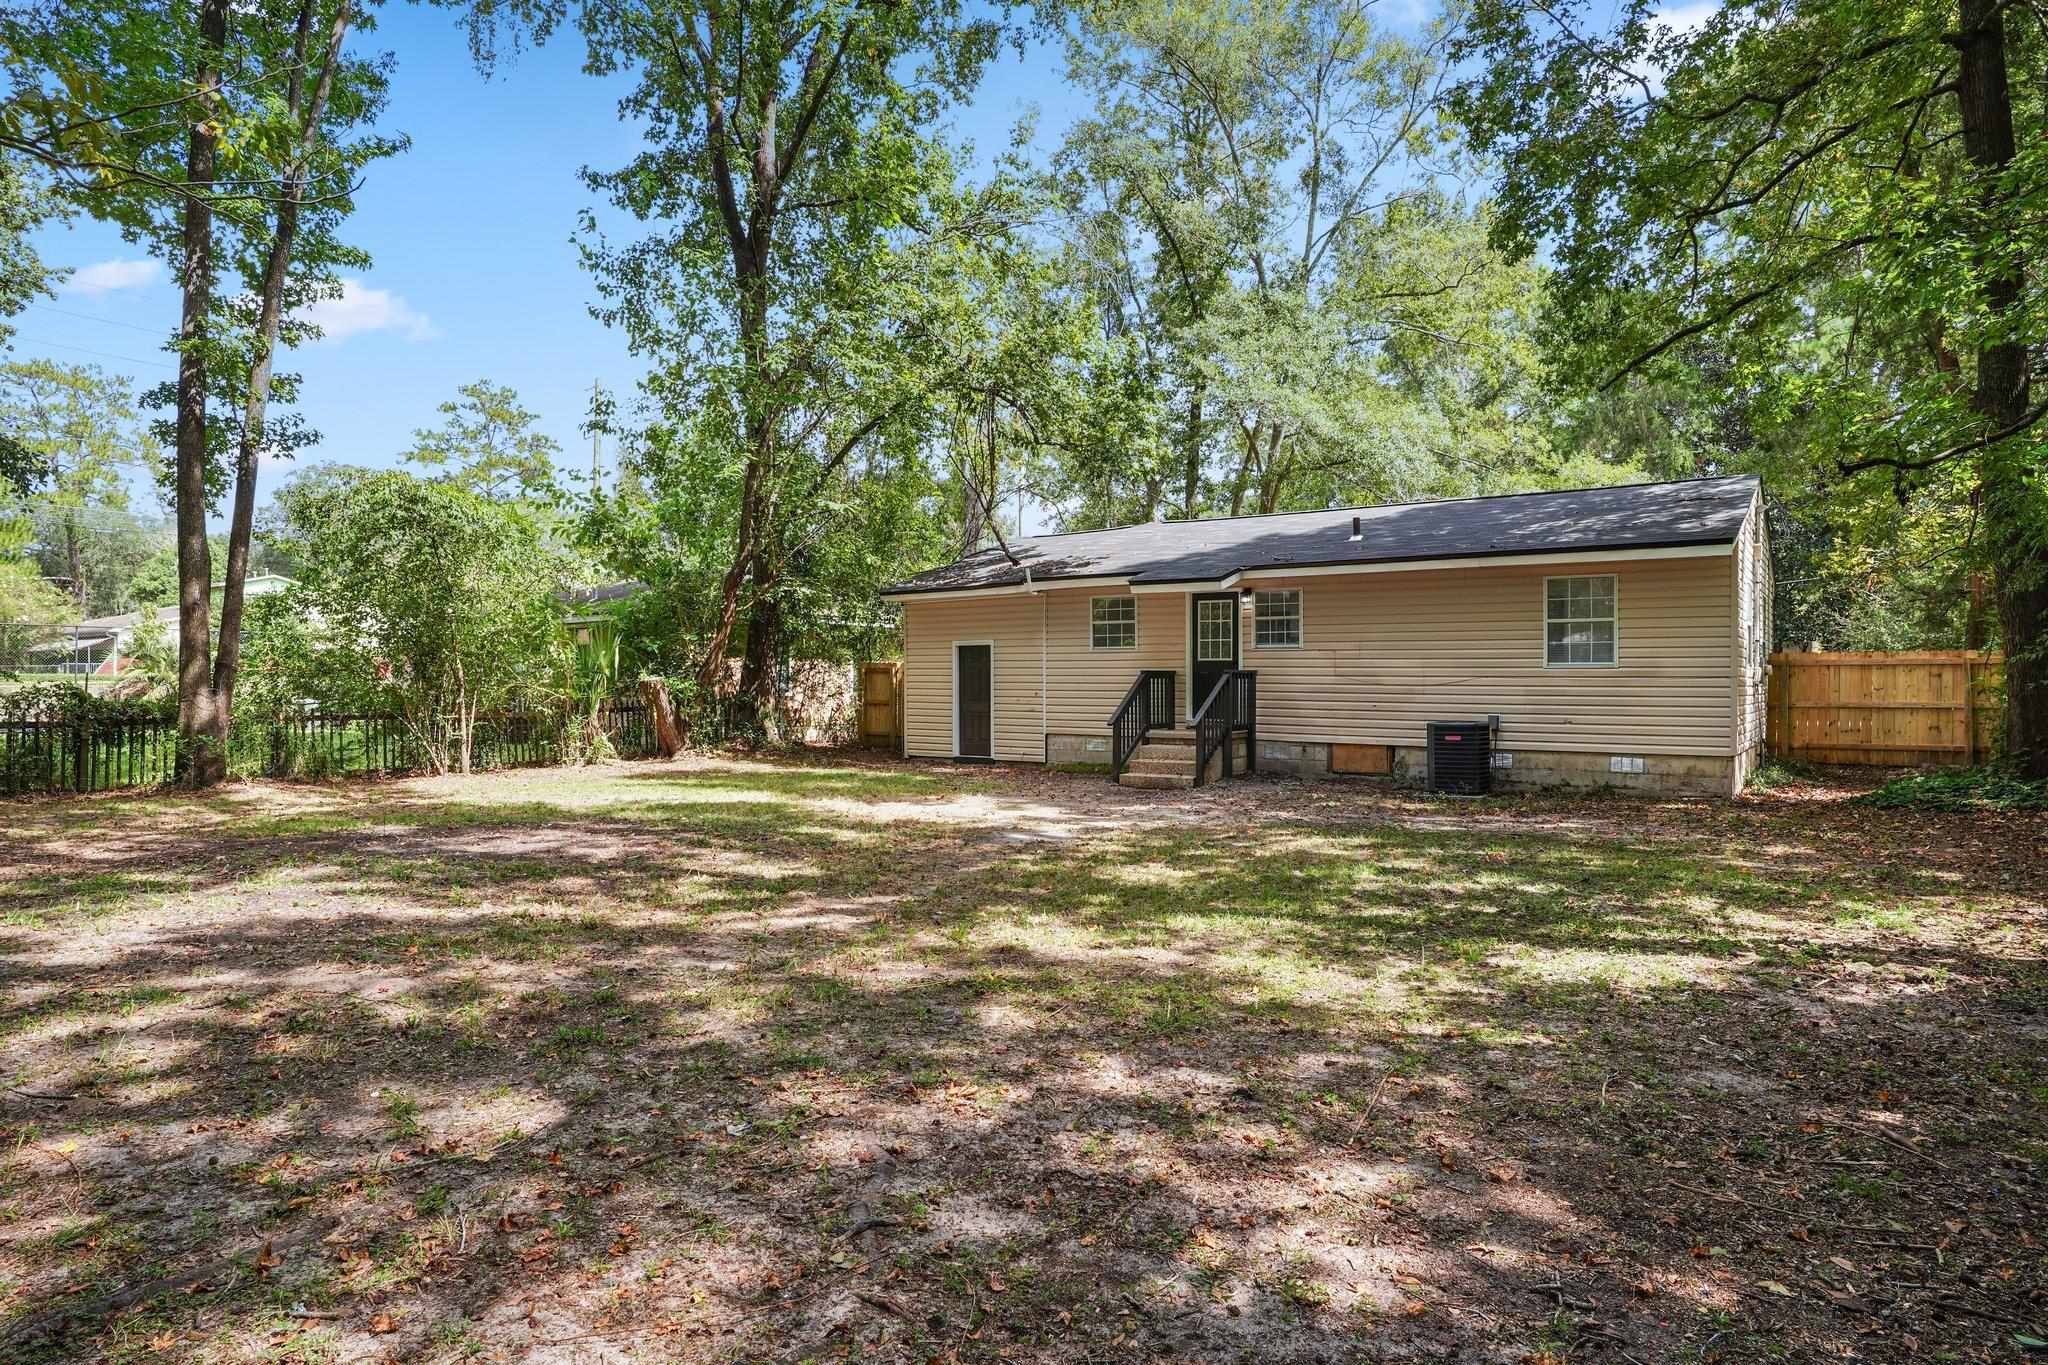 2804 Southwood Drive,TALLAHASSEE,Florida 32301,4 Bedrooms Bedrooms,1 BathroomBathrooms,Detached single family,2804 Southwood Drive,367453